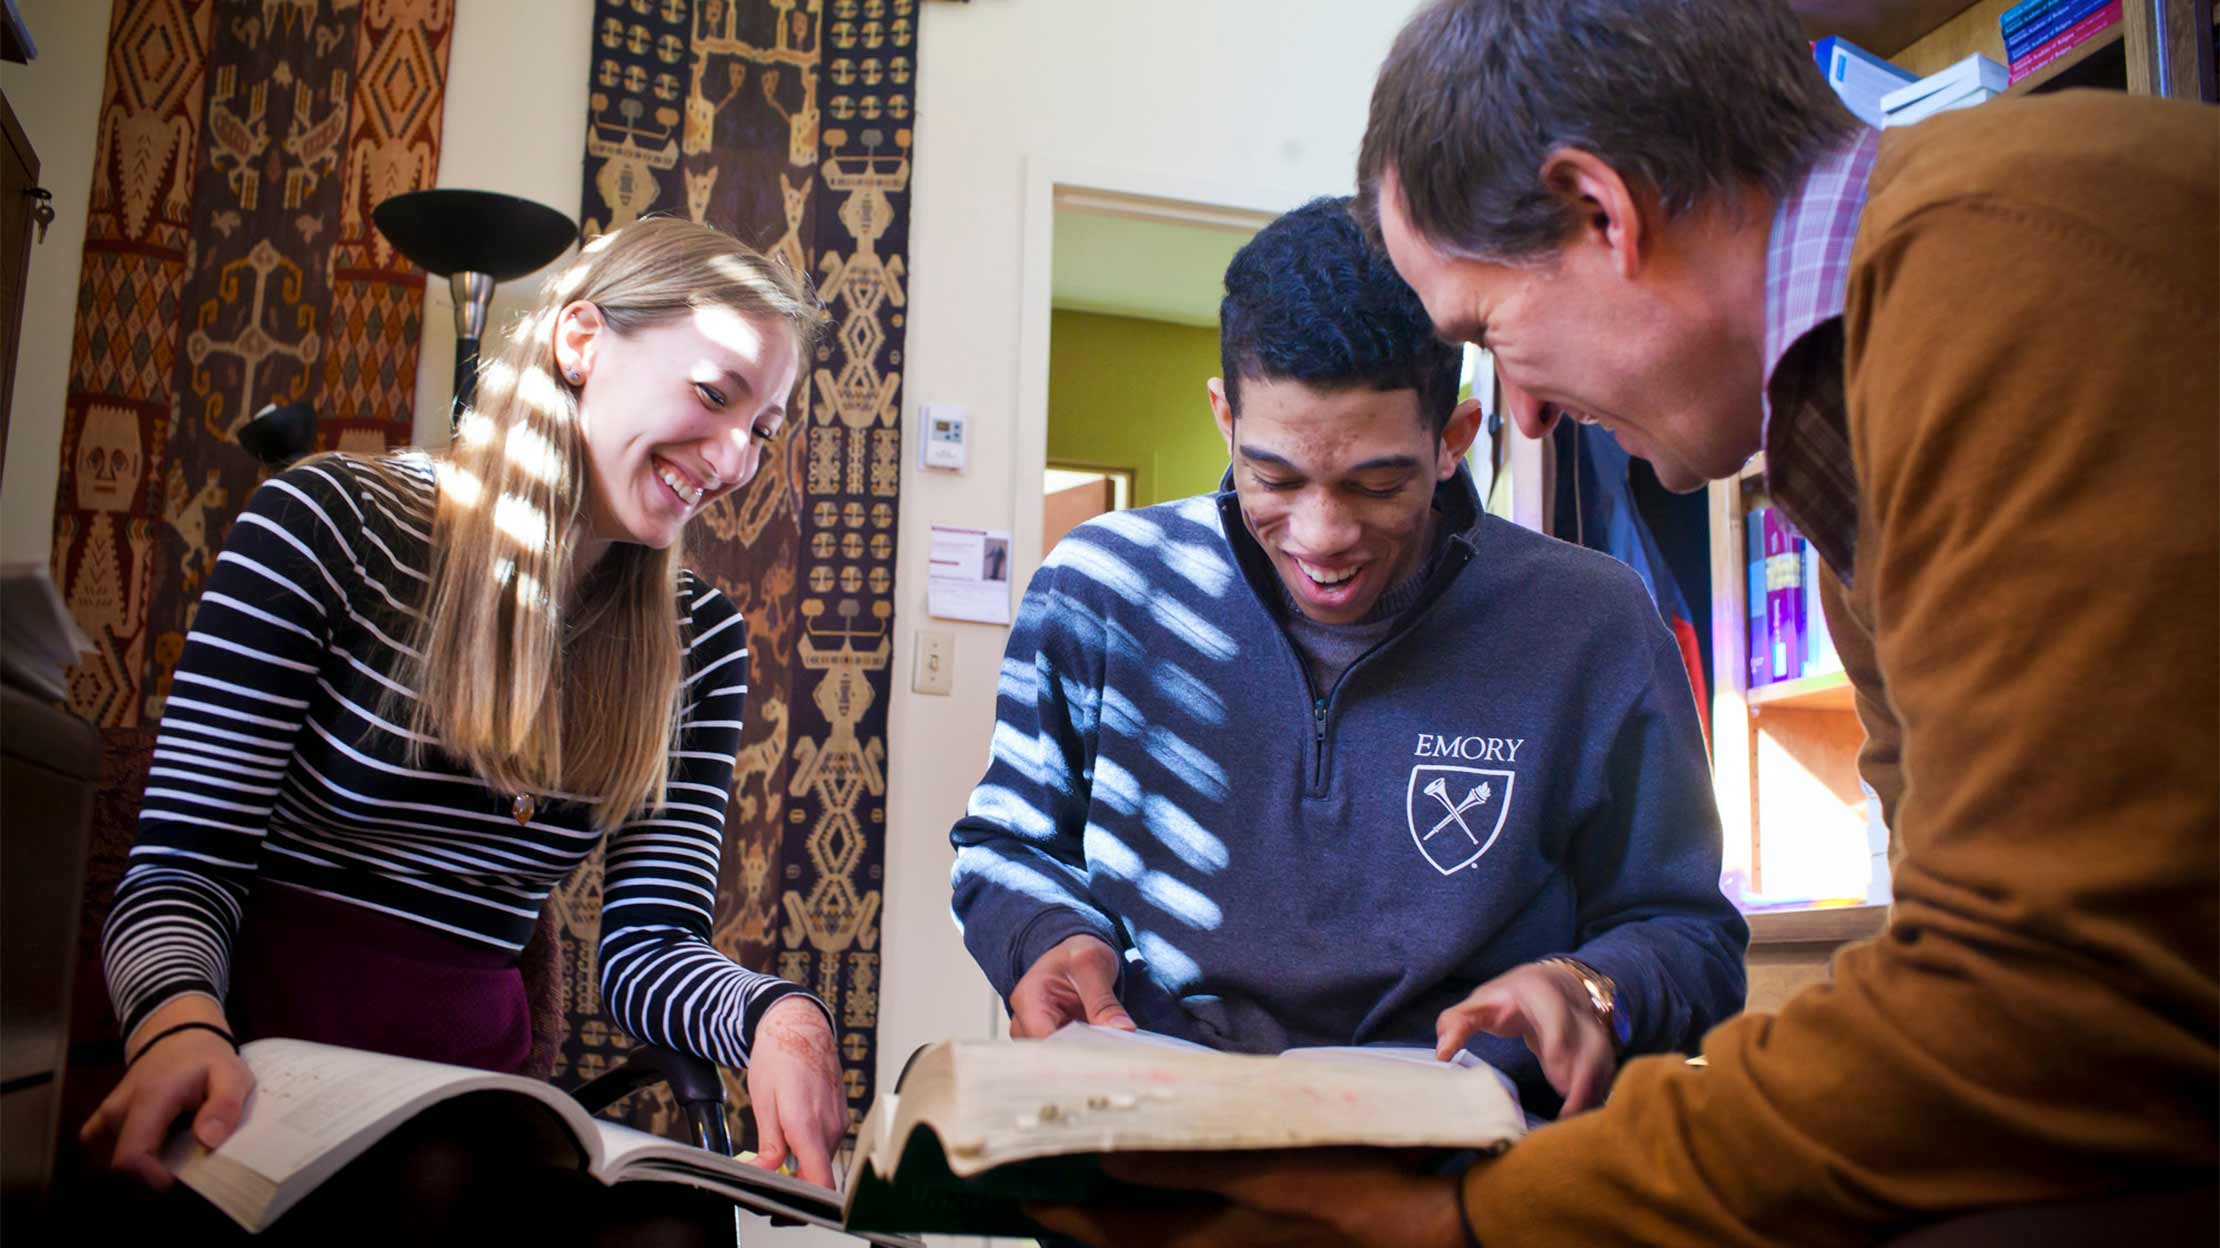 Instructor and two students looking at books in an office